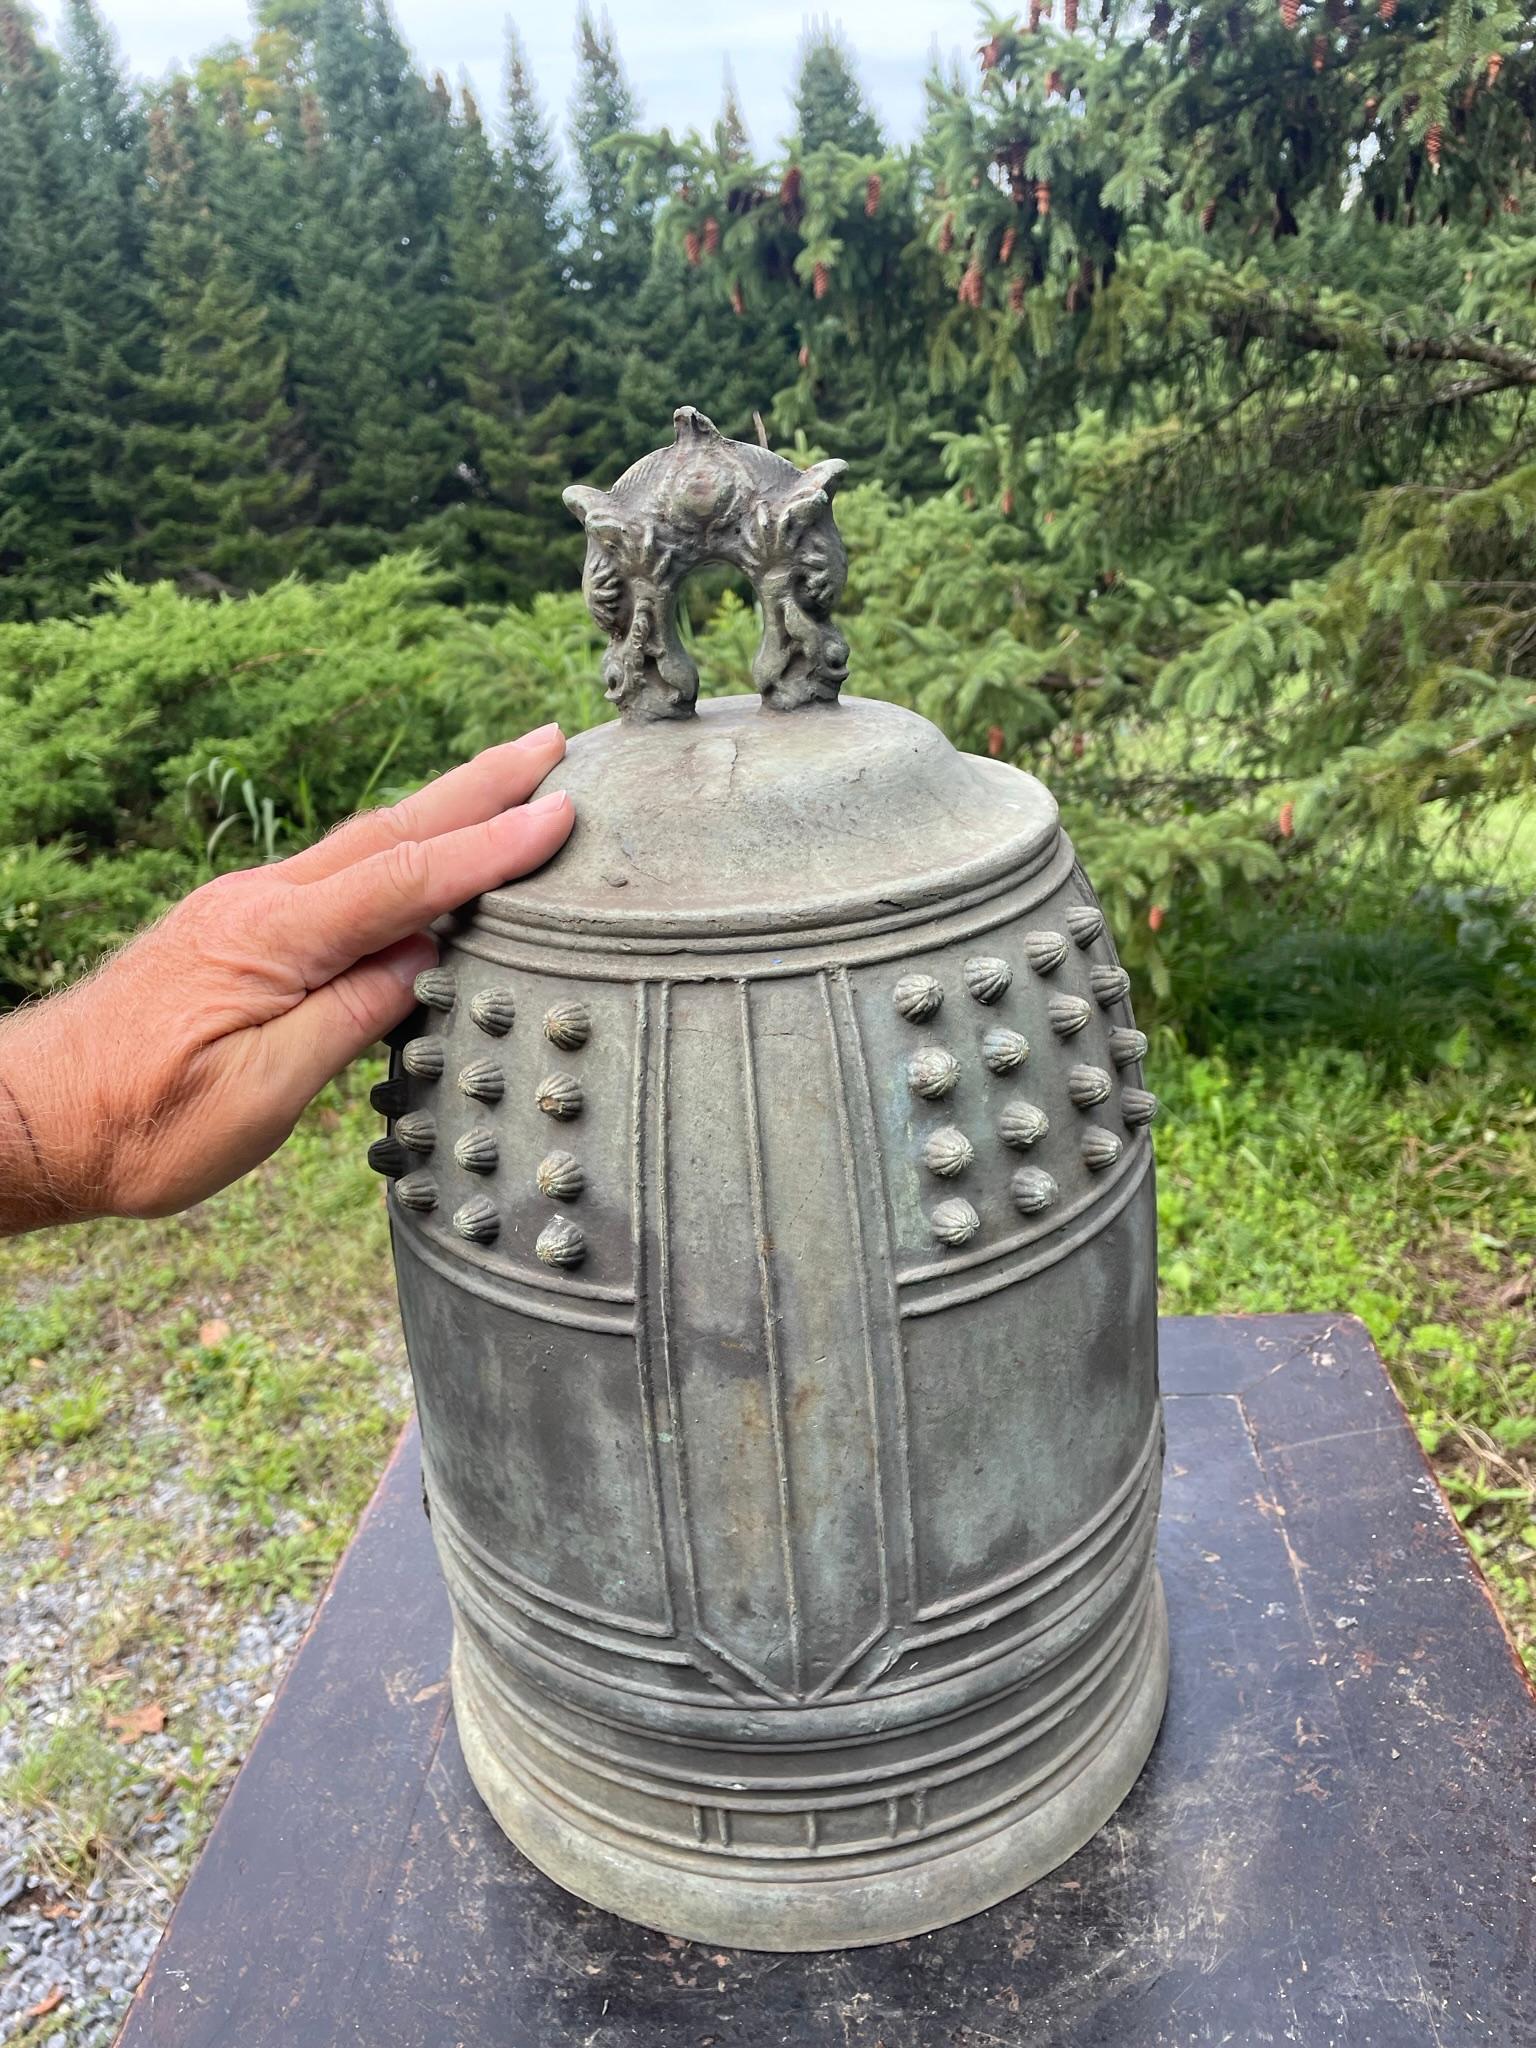 For your special garden setting or indoor display space.

Big Hand Cast Bronze Bell Bold pleasing sound, signed by Japanese maker in Kanji script

Signed.

Beautiful deep resonating ring tones await the new owner of this big one-of-a-kind vintage